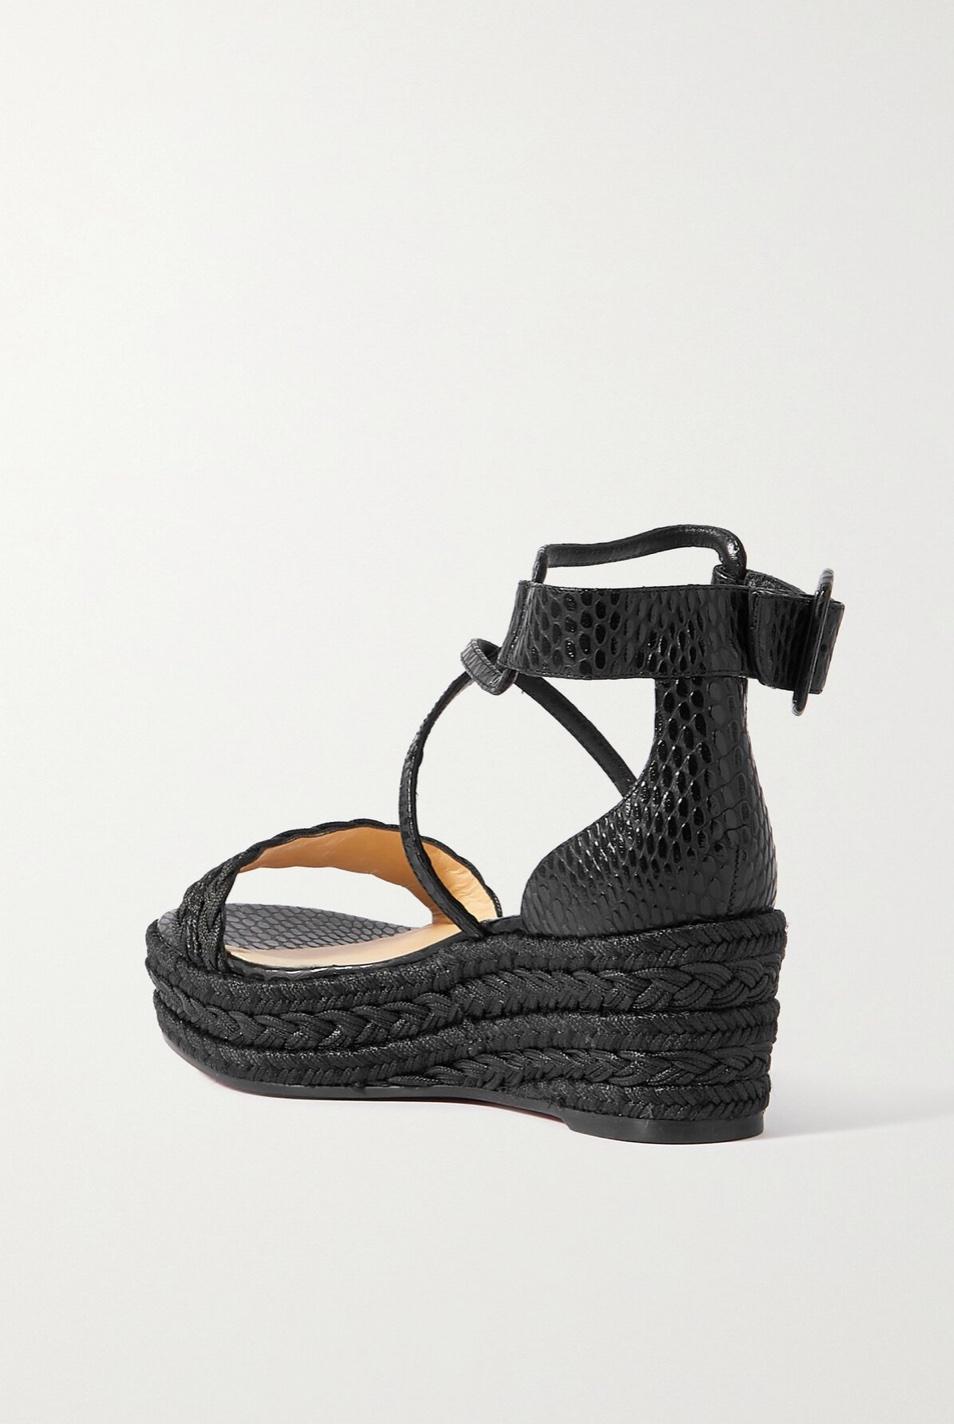 Christian Louboutin Bodrum 60 Black Leather Wedge Sandal Sz 38 In New Condition For Sale In Paradise Island, BS